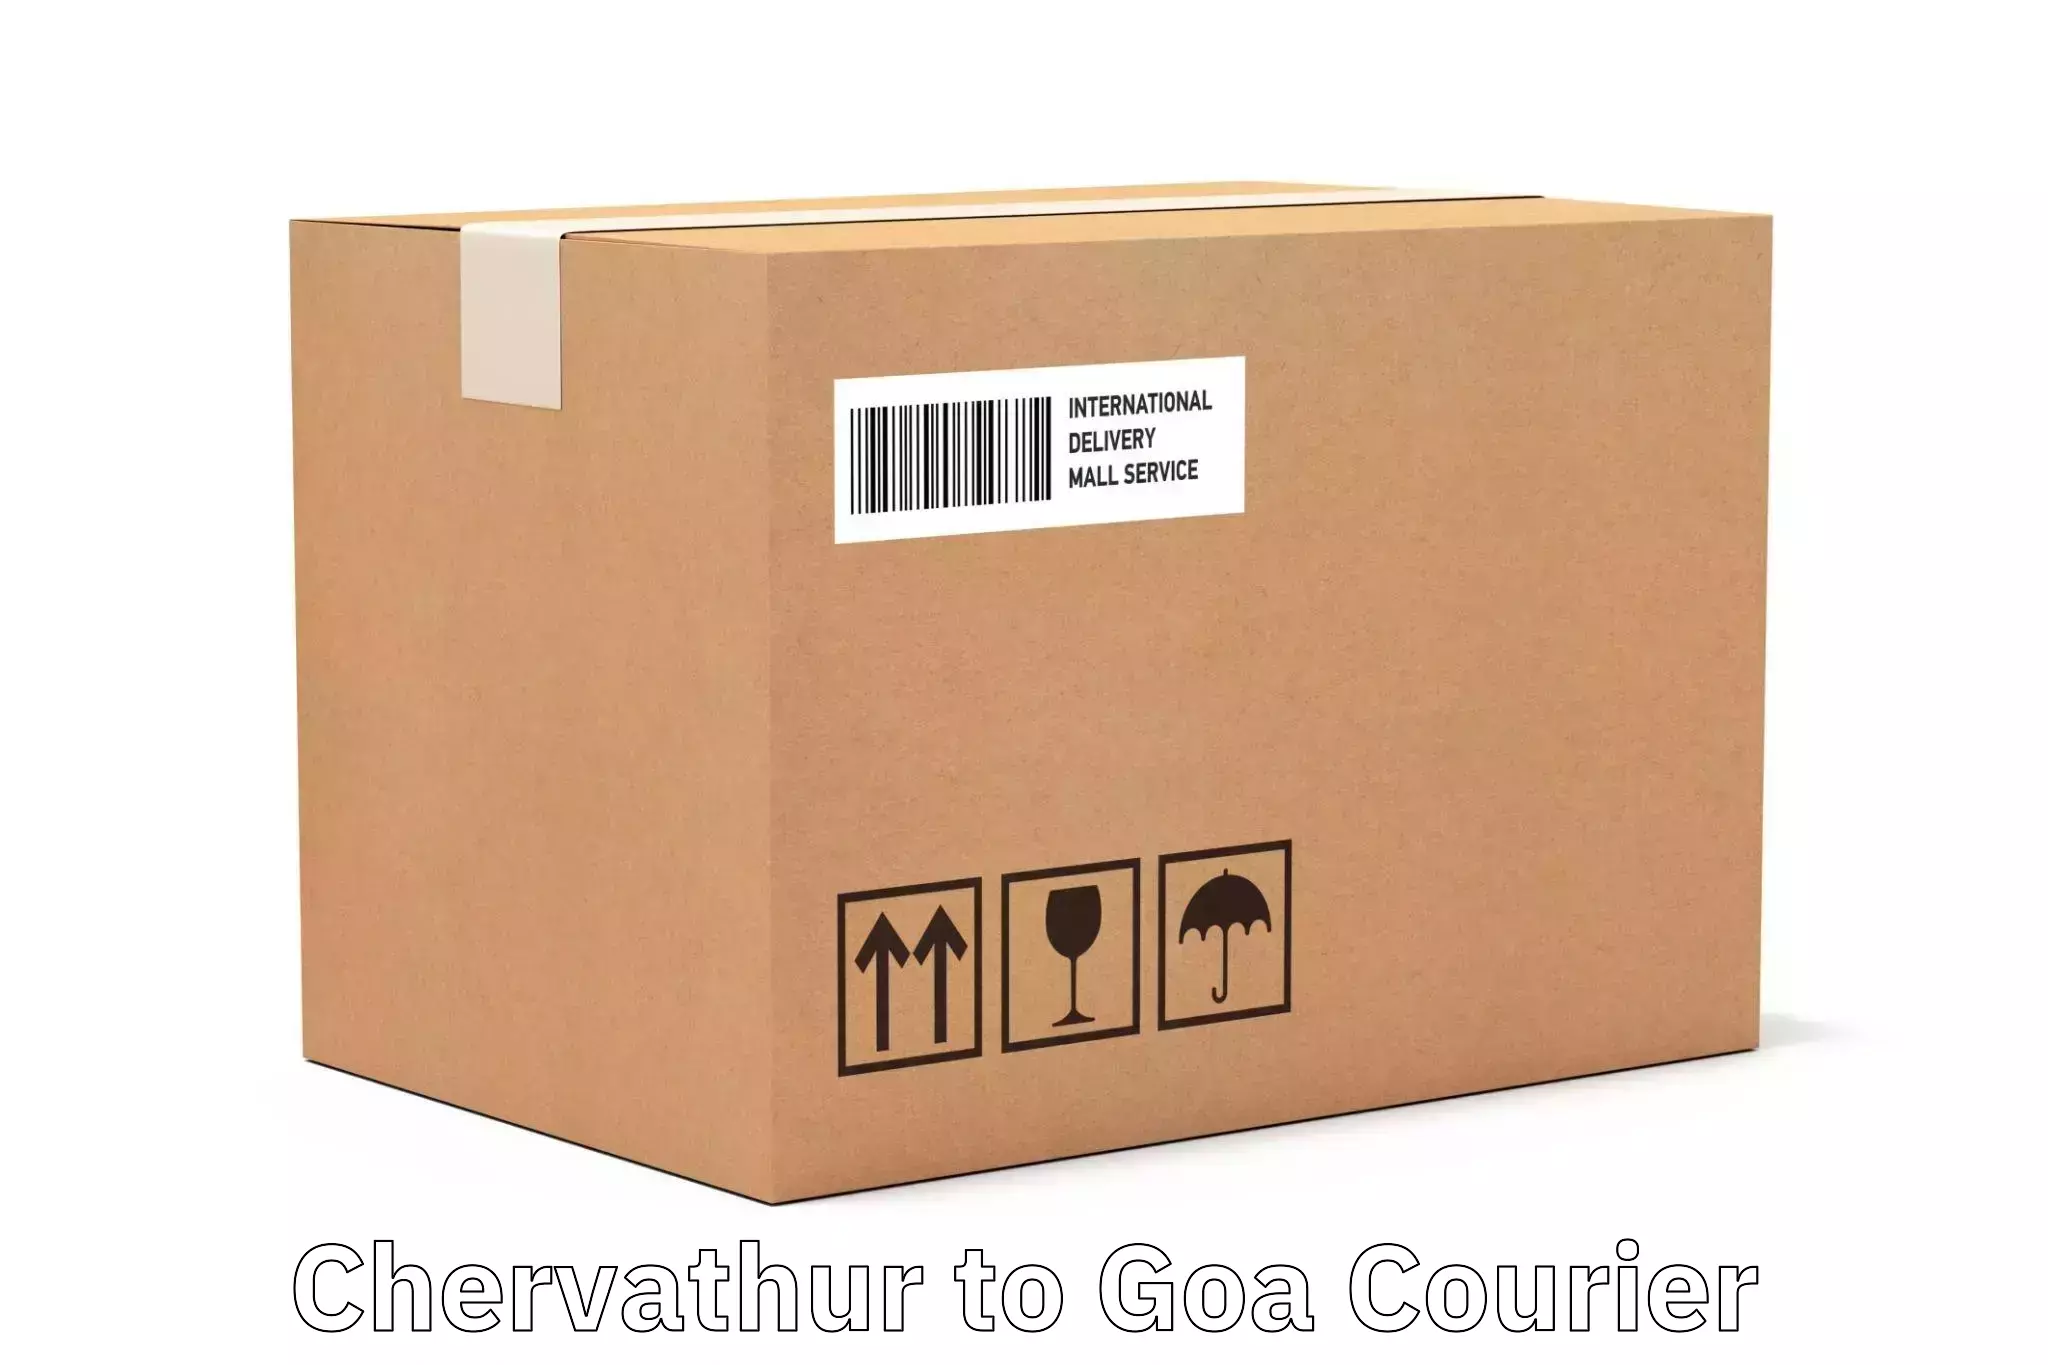 Express mail solutions Chervathur to Margao